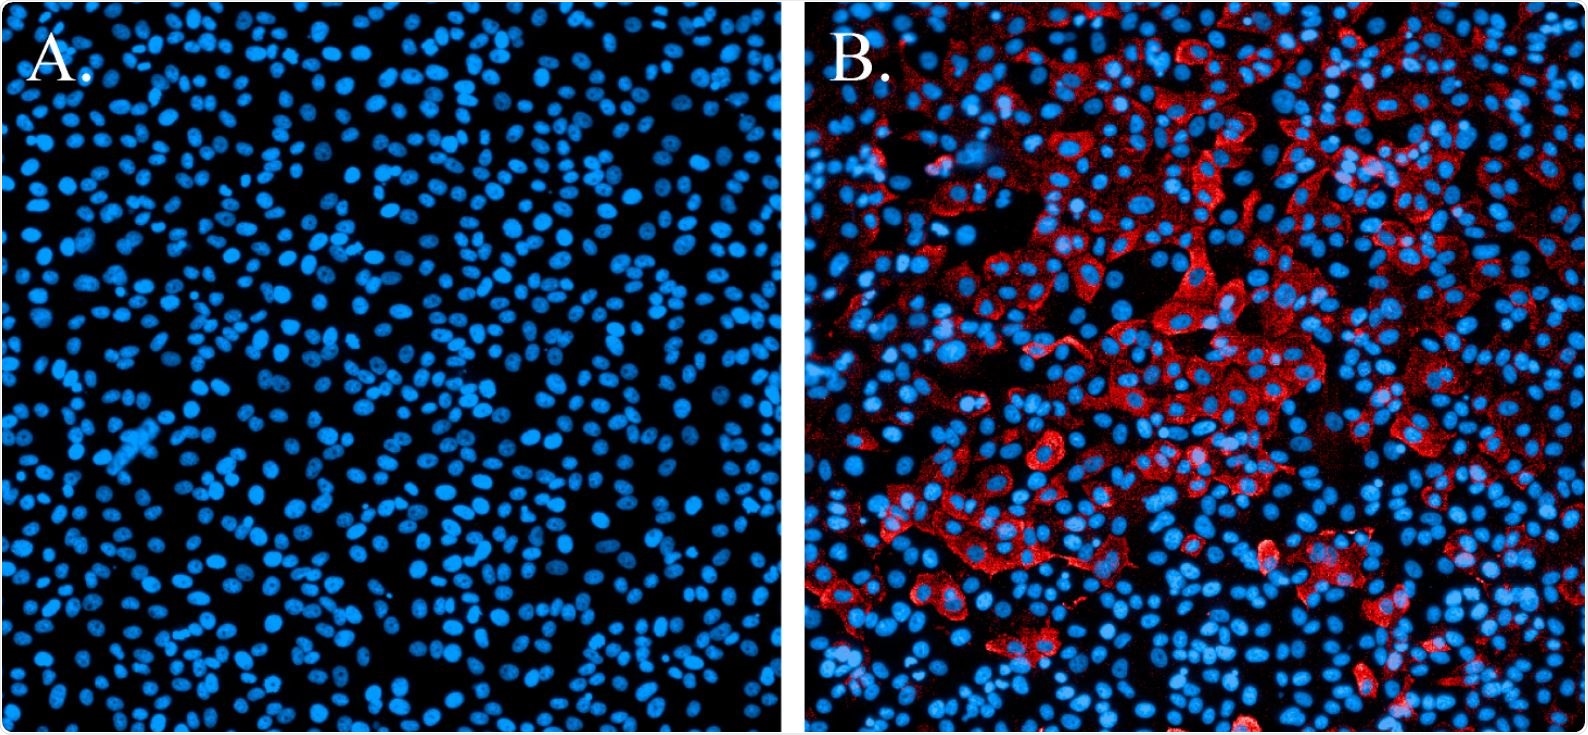 Immunofluorescence staining of SARS-CoV-2-infected cells. (A). Non-infected cells stained with Hoechst nuclear stain (blue). (B). Cells infected with SARS-CoV-2 and probed with a SARS-CoV N-protein-specific antibody and Alexa594 secondary antibody (red). Cells were counterstained with Hoechst nuclear stain (blue).